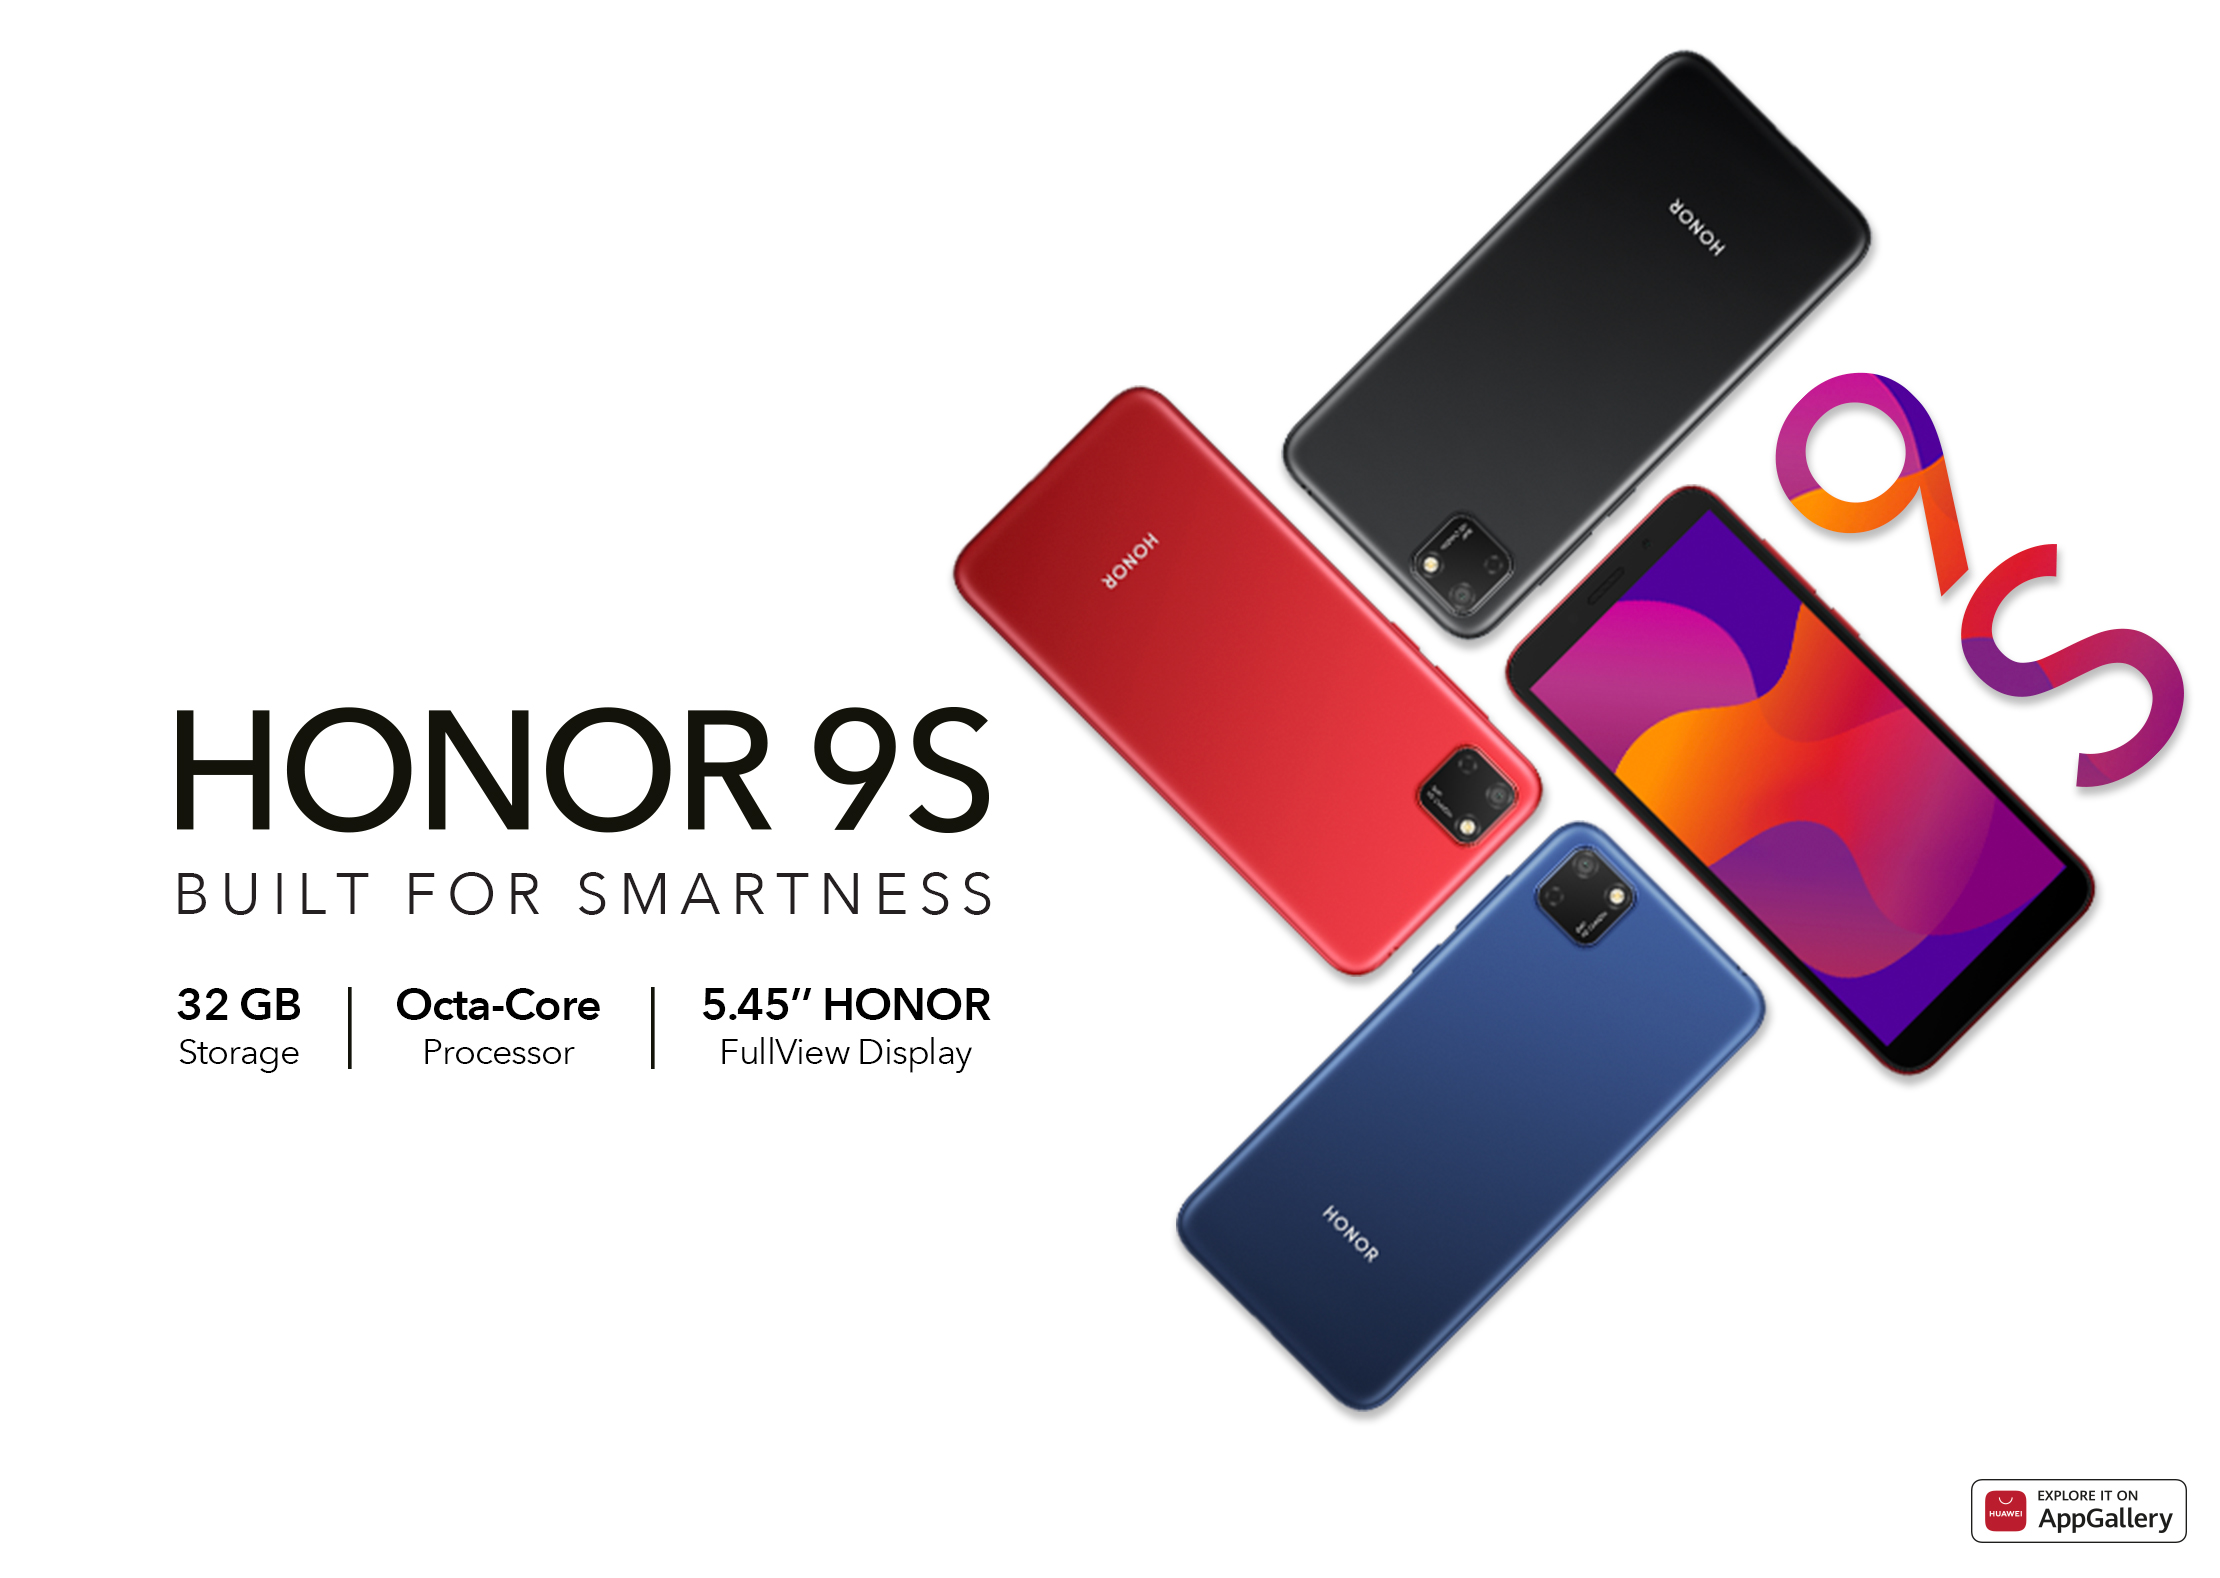 Image for HONOR Launches New Budget-Friendly Smartphone HONOR 9S Packing The Latest Magic UI 3.1 And High-End Features